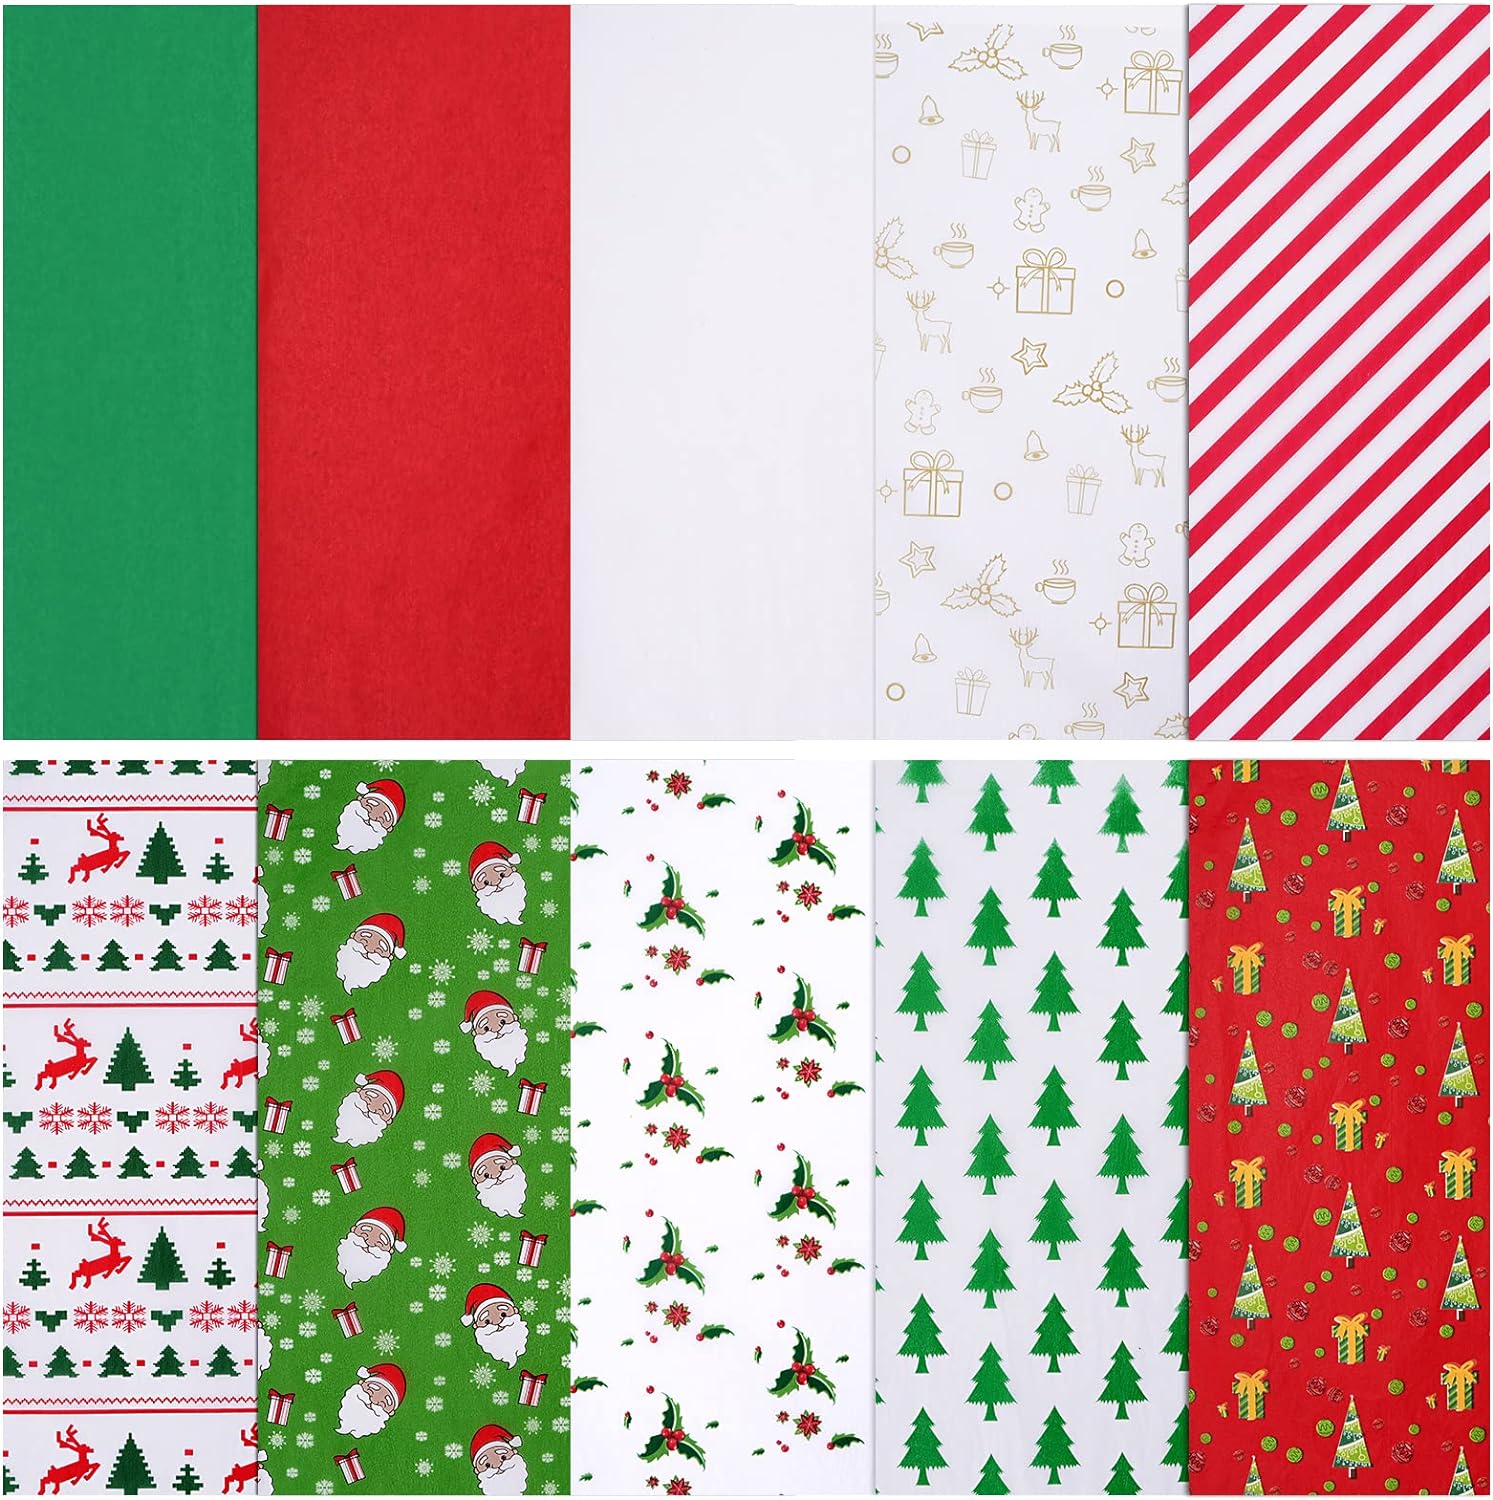 Blisstime 100 Sheets Tissue Paper, 19.7 X 13.8 Christmas Tissue Paper for Gift Bags, Xmas Tissue Paper for Gift Wrapping and DIY Gift Bags, Christmas Presents, Holiday Crafts (100)